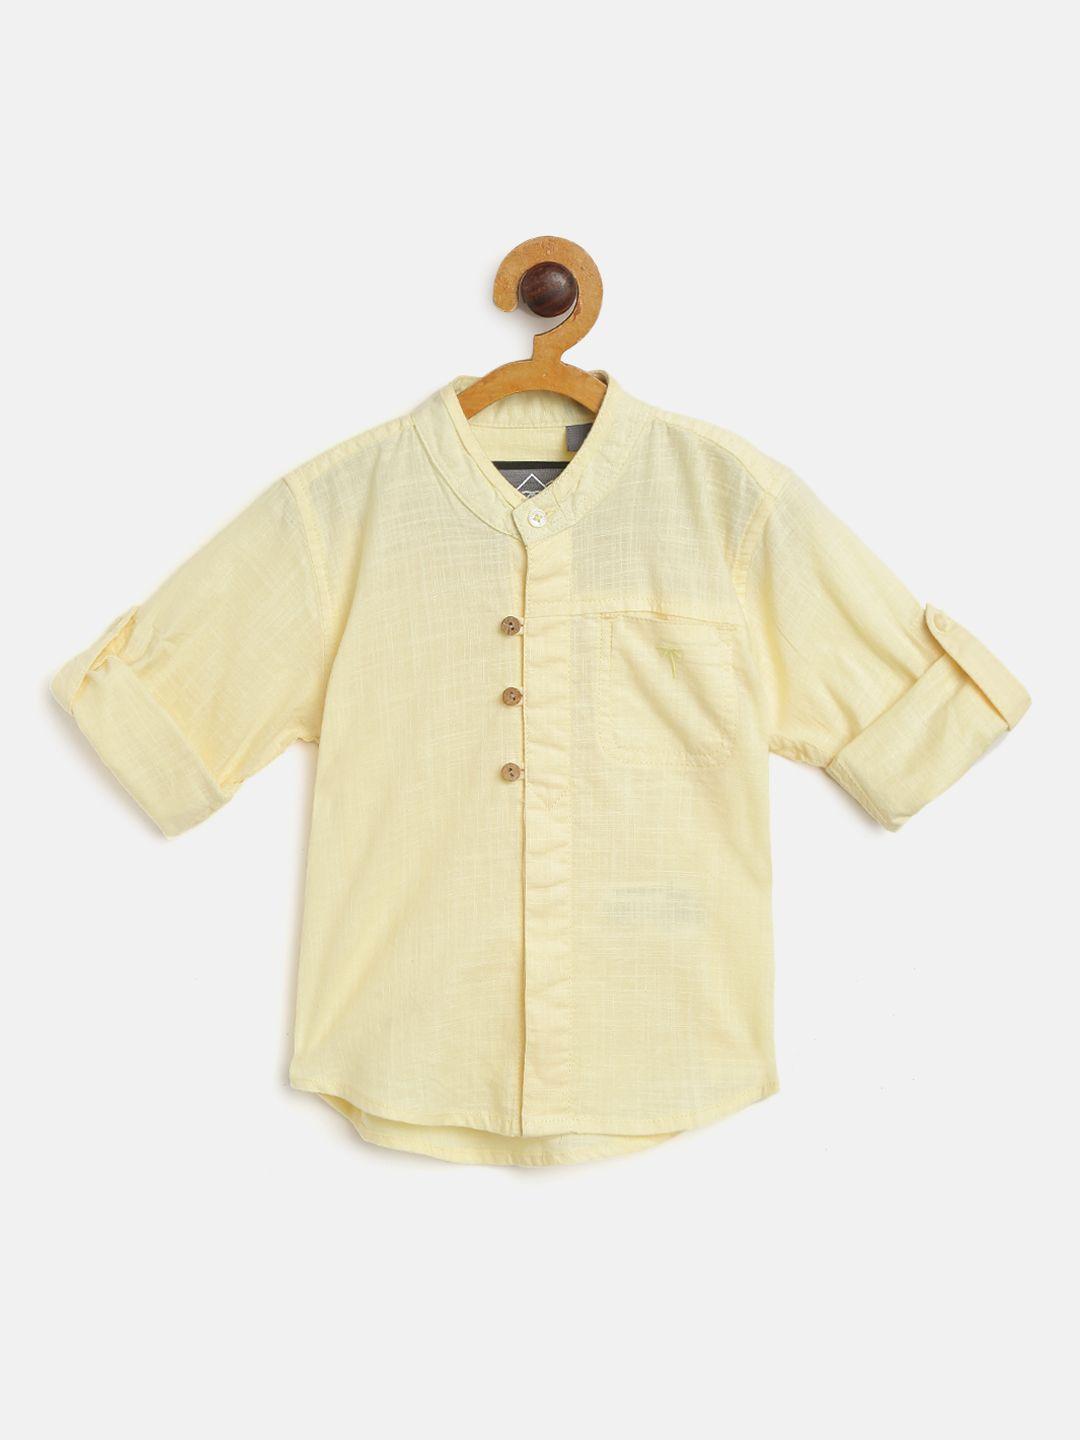 Palm Tree Boys Yellow Regular Fit Solid Casual Shirt